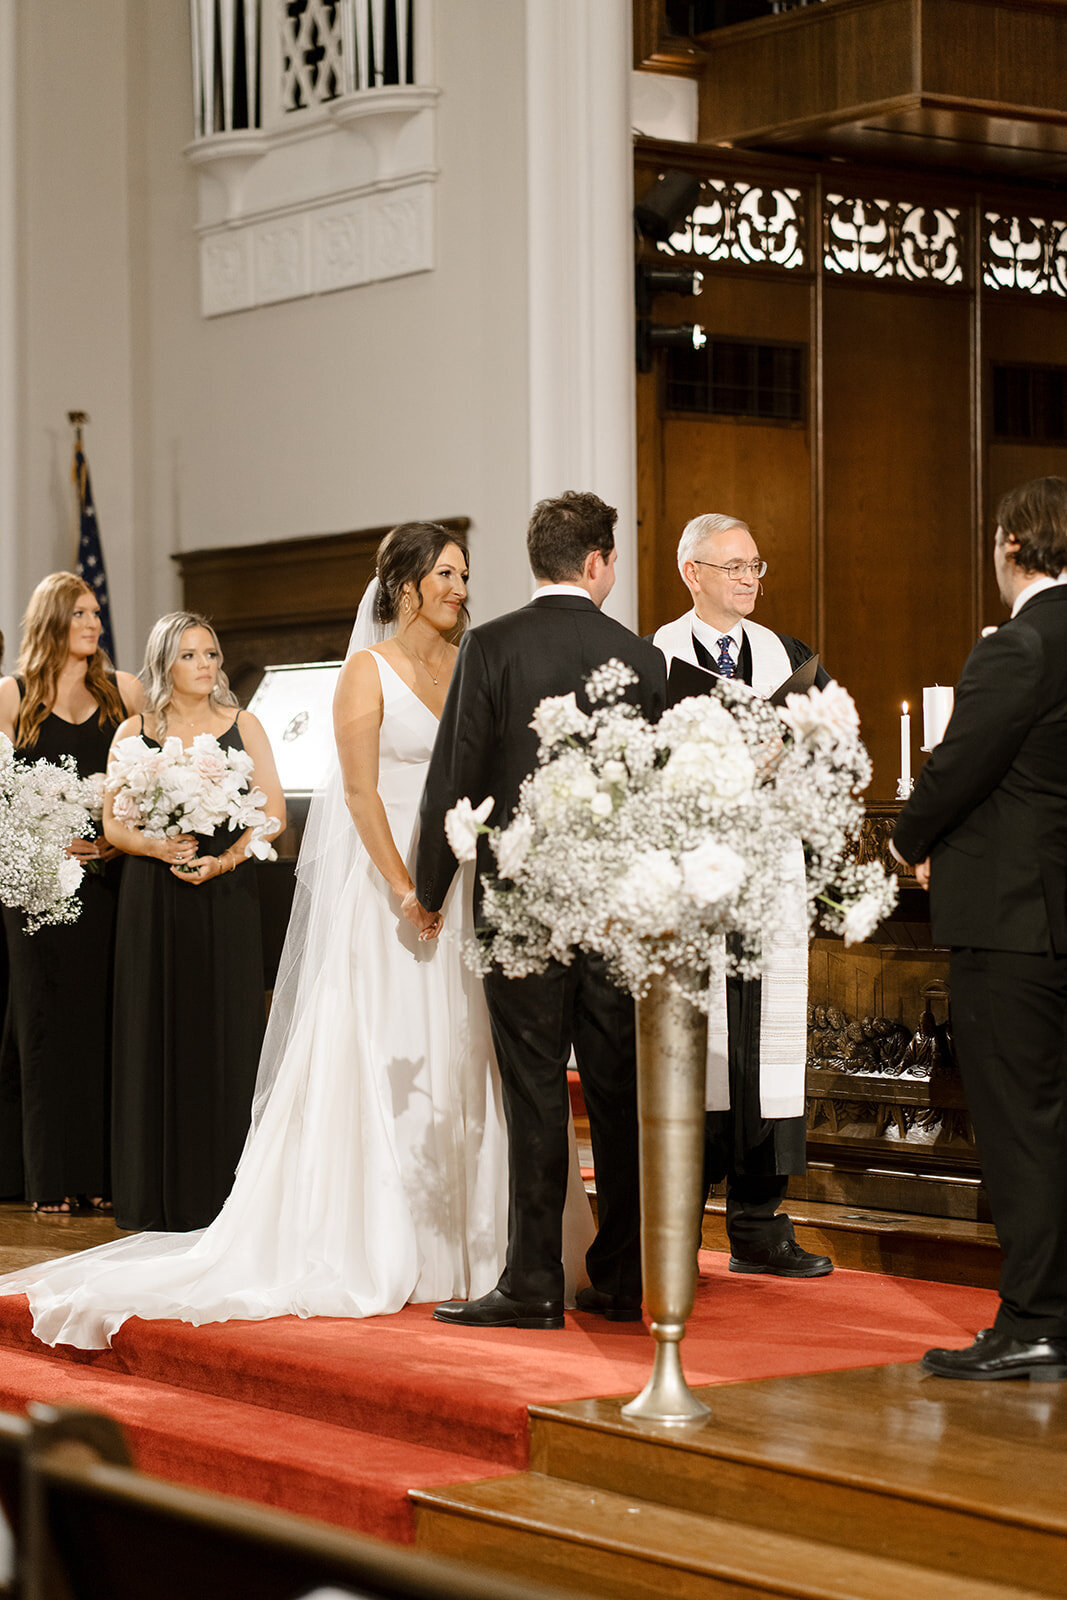 Kylie and Jack at The Grand Hall - Kansas City Wedding Photograpy - Nick and Lexie Photo Film-652